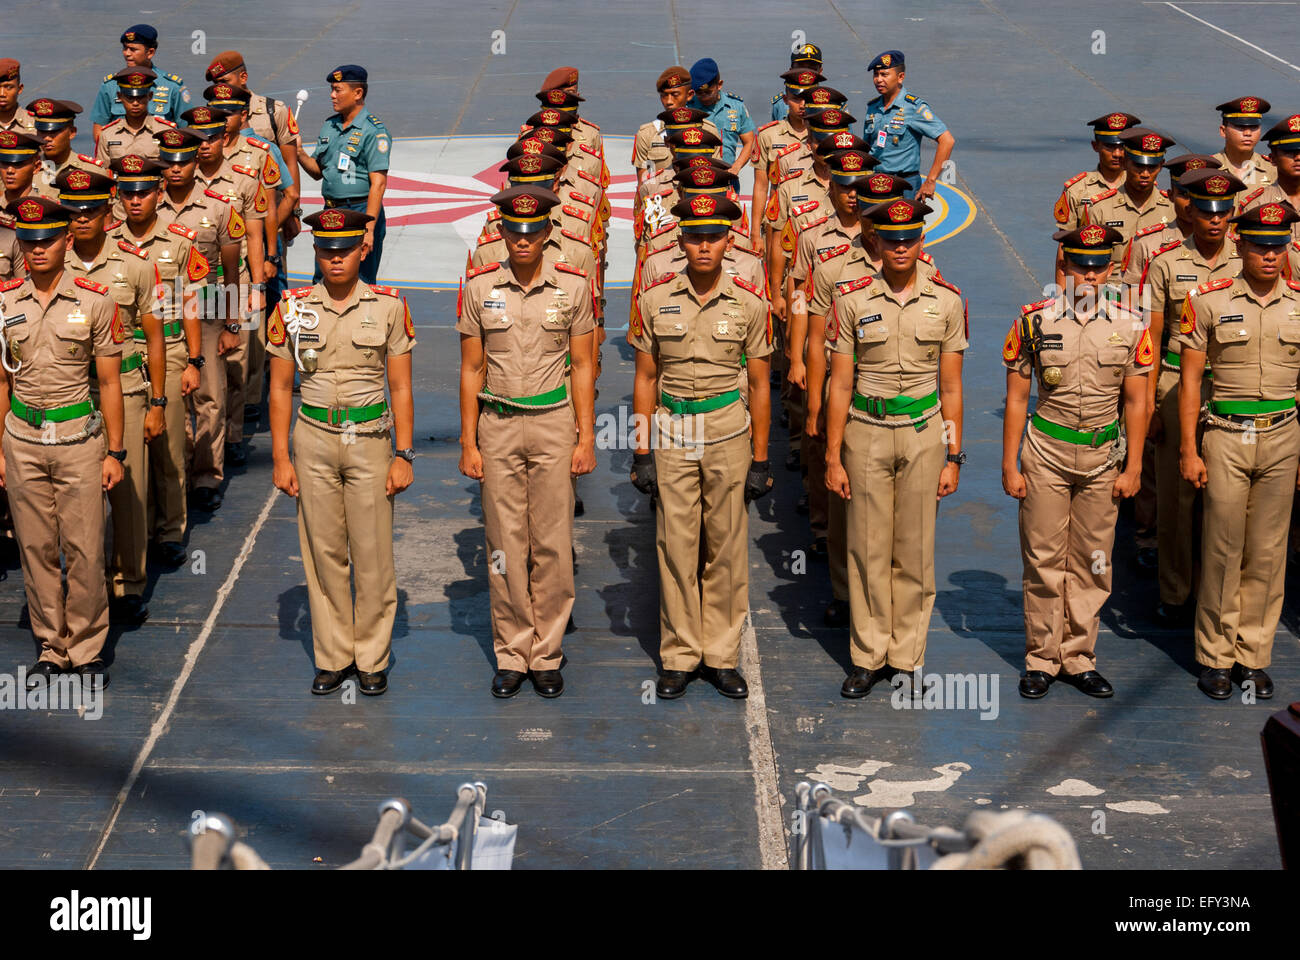 Indonesian navy cadets of KRI Dewaruci (Dewa Ruci) lining up for a ceremony and briefing in Jakarta, Indonesia. Stock Photo